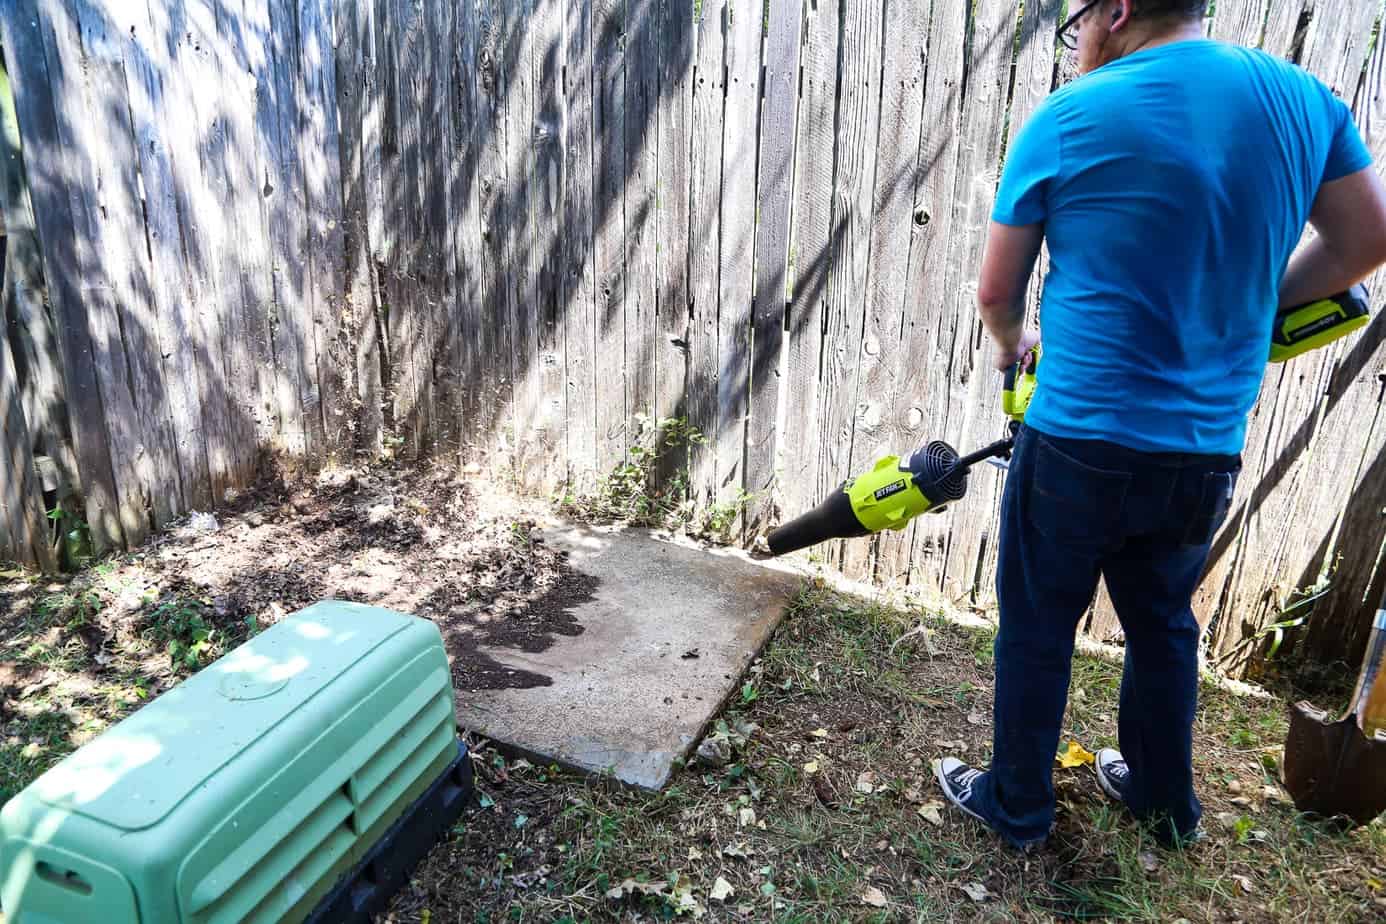 A quick backyard clean-up, thanks to Ryobi tools and a little elbow grease! Plus, great tips on how to keep you backyard organized and maintained throughout the summer.